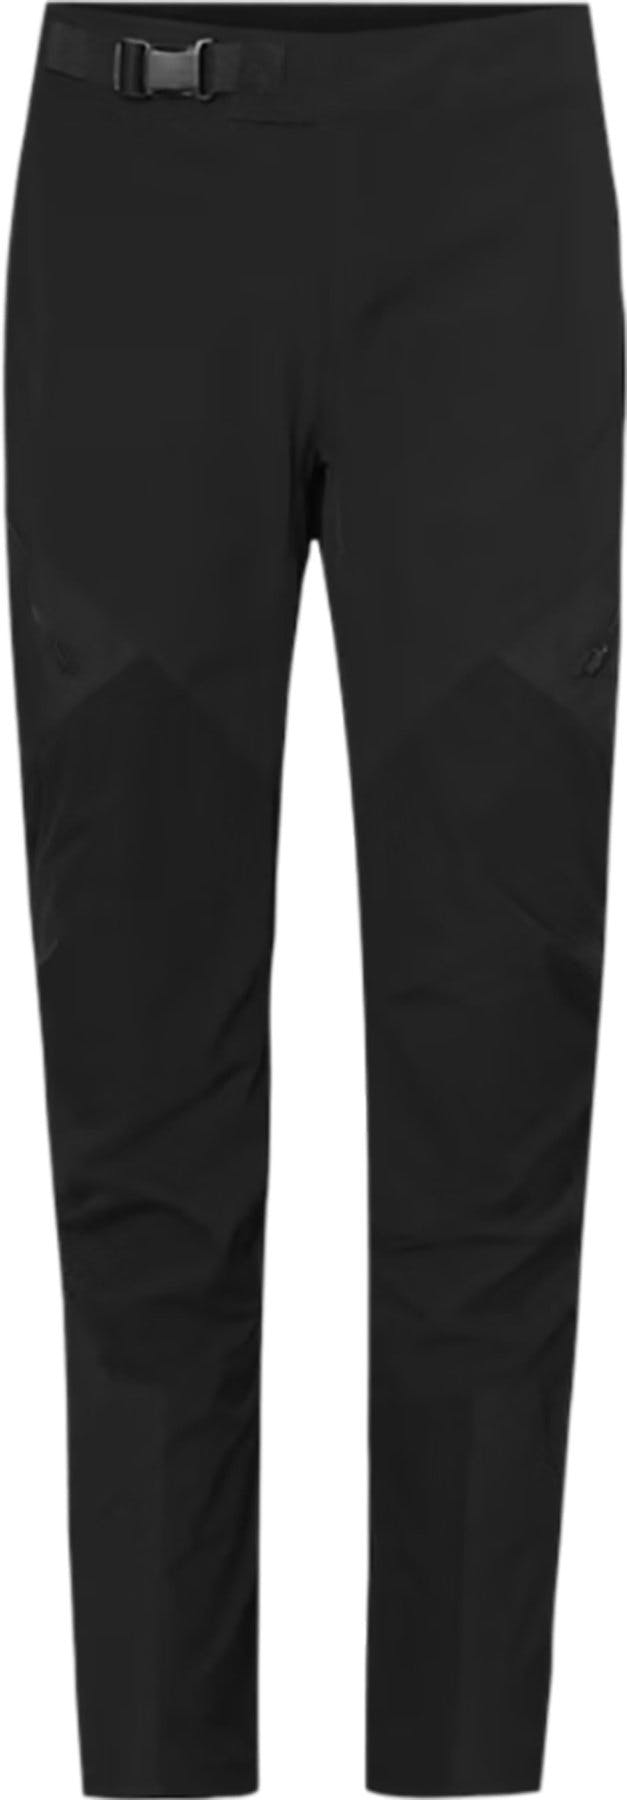 Product image for Hunter Pants - Women's